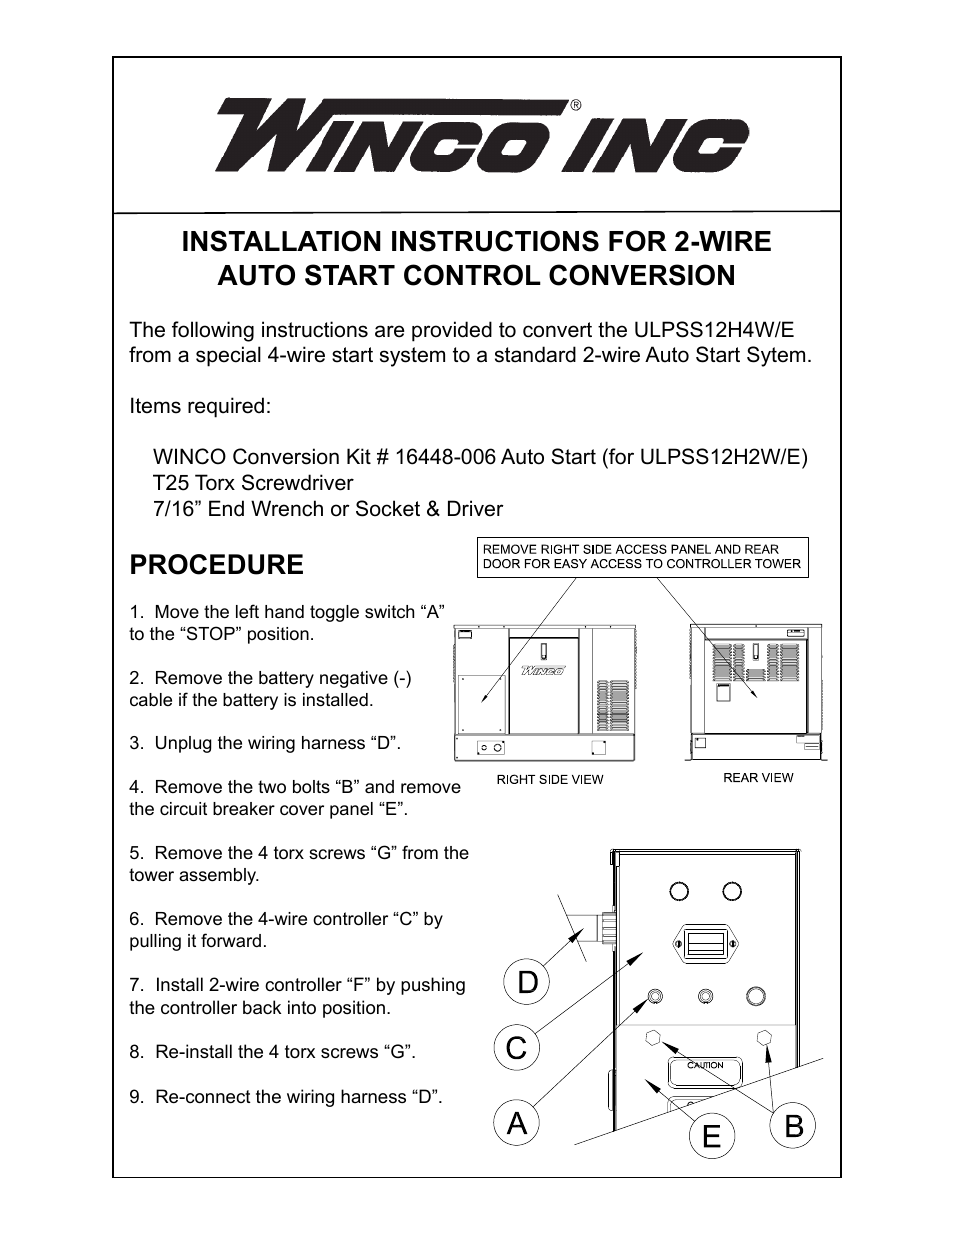 2-Wire Conversion Instructions ULPSS12H2W/E